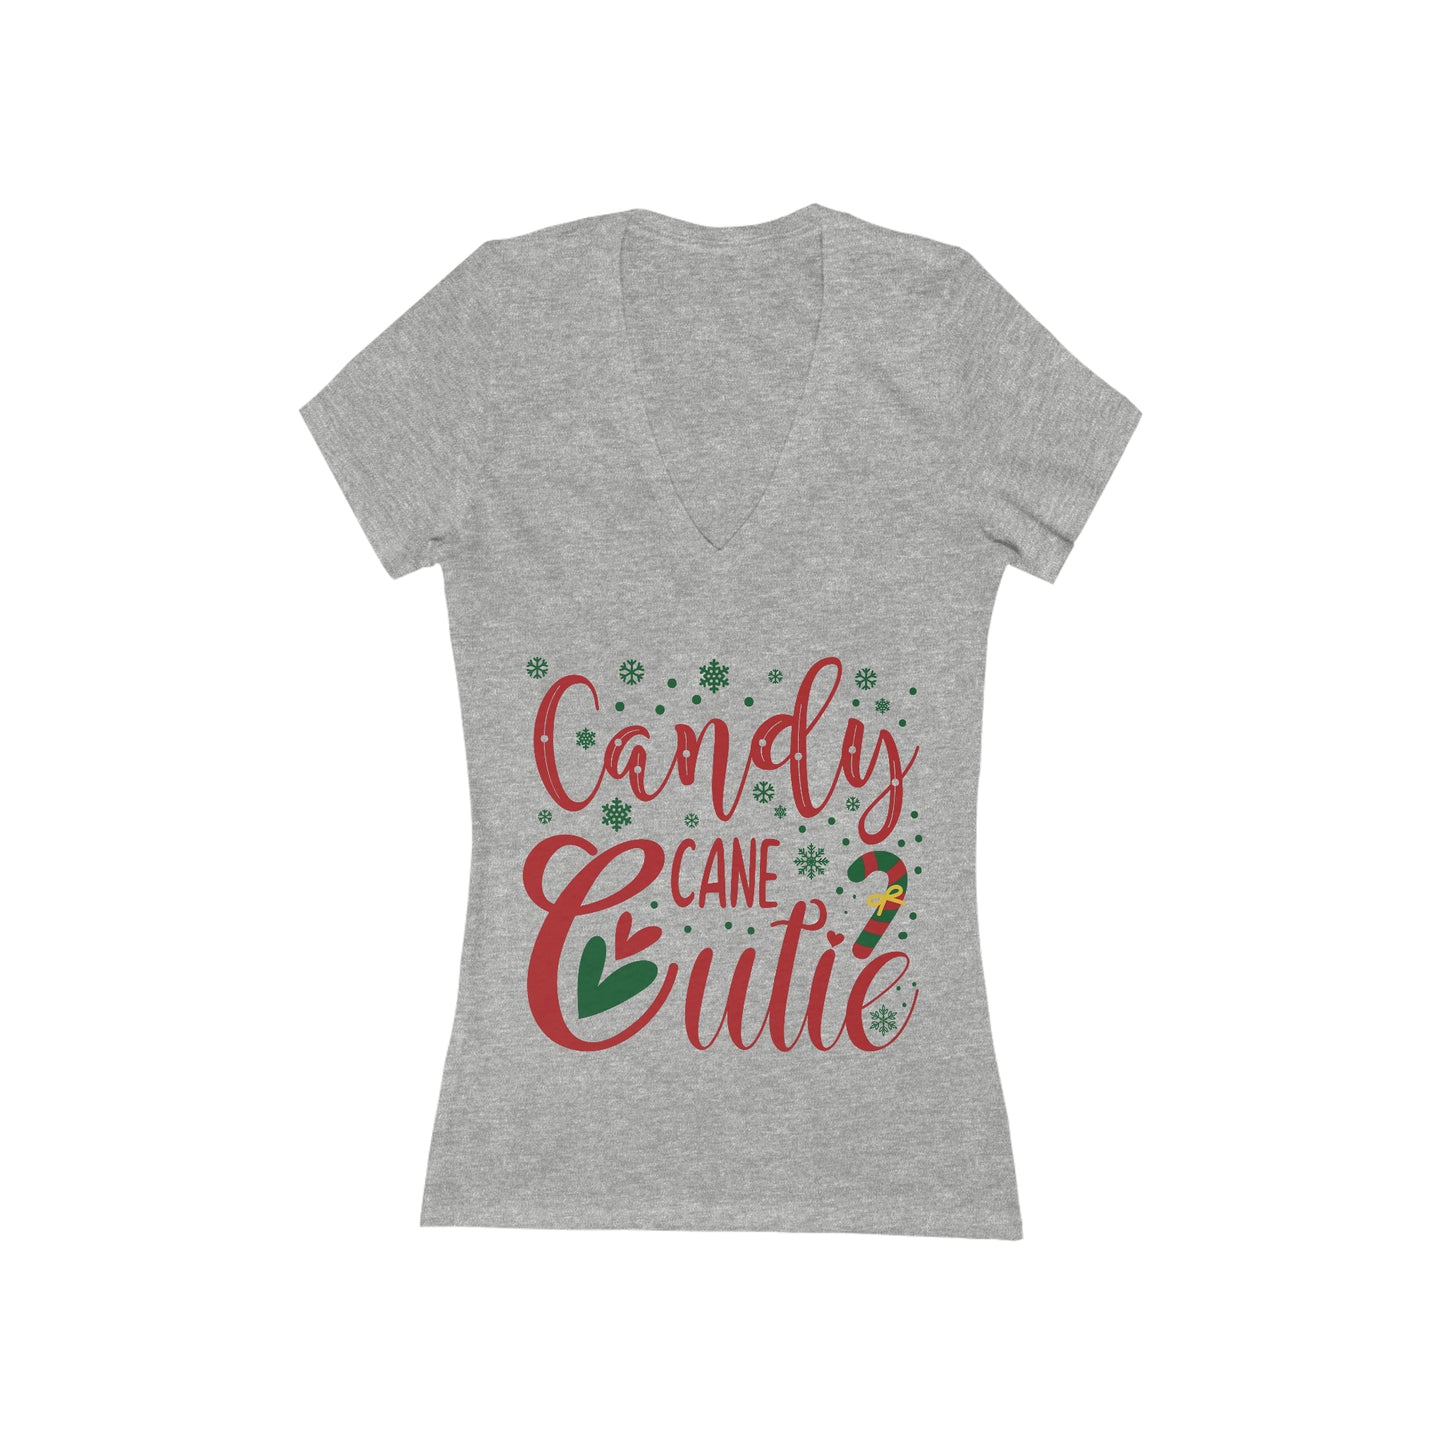 Candy Cane T-Shirt For Cute Holiday TShirt For Ladies Christmas V Neck T Shirt